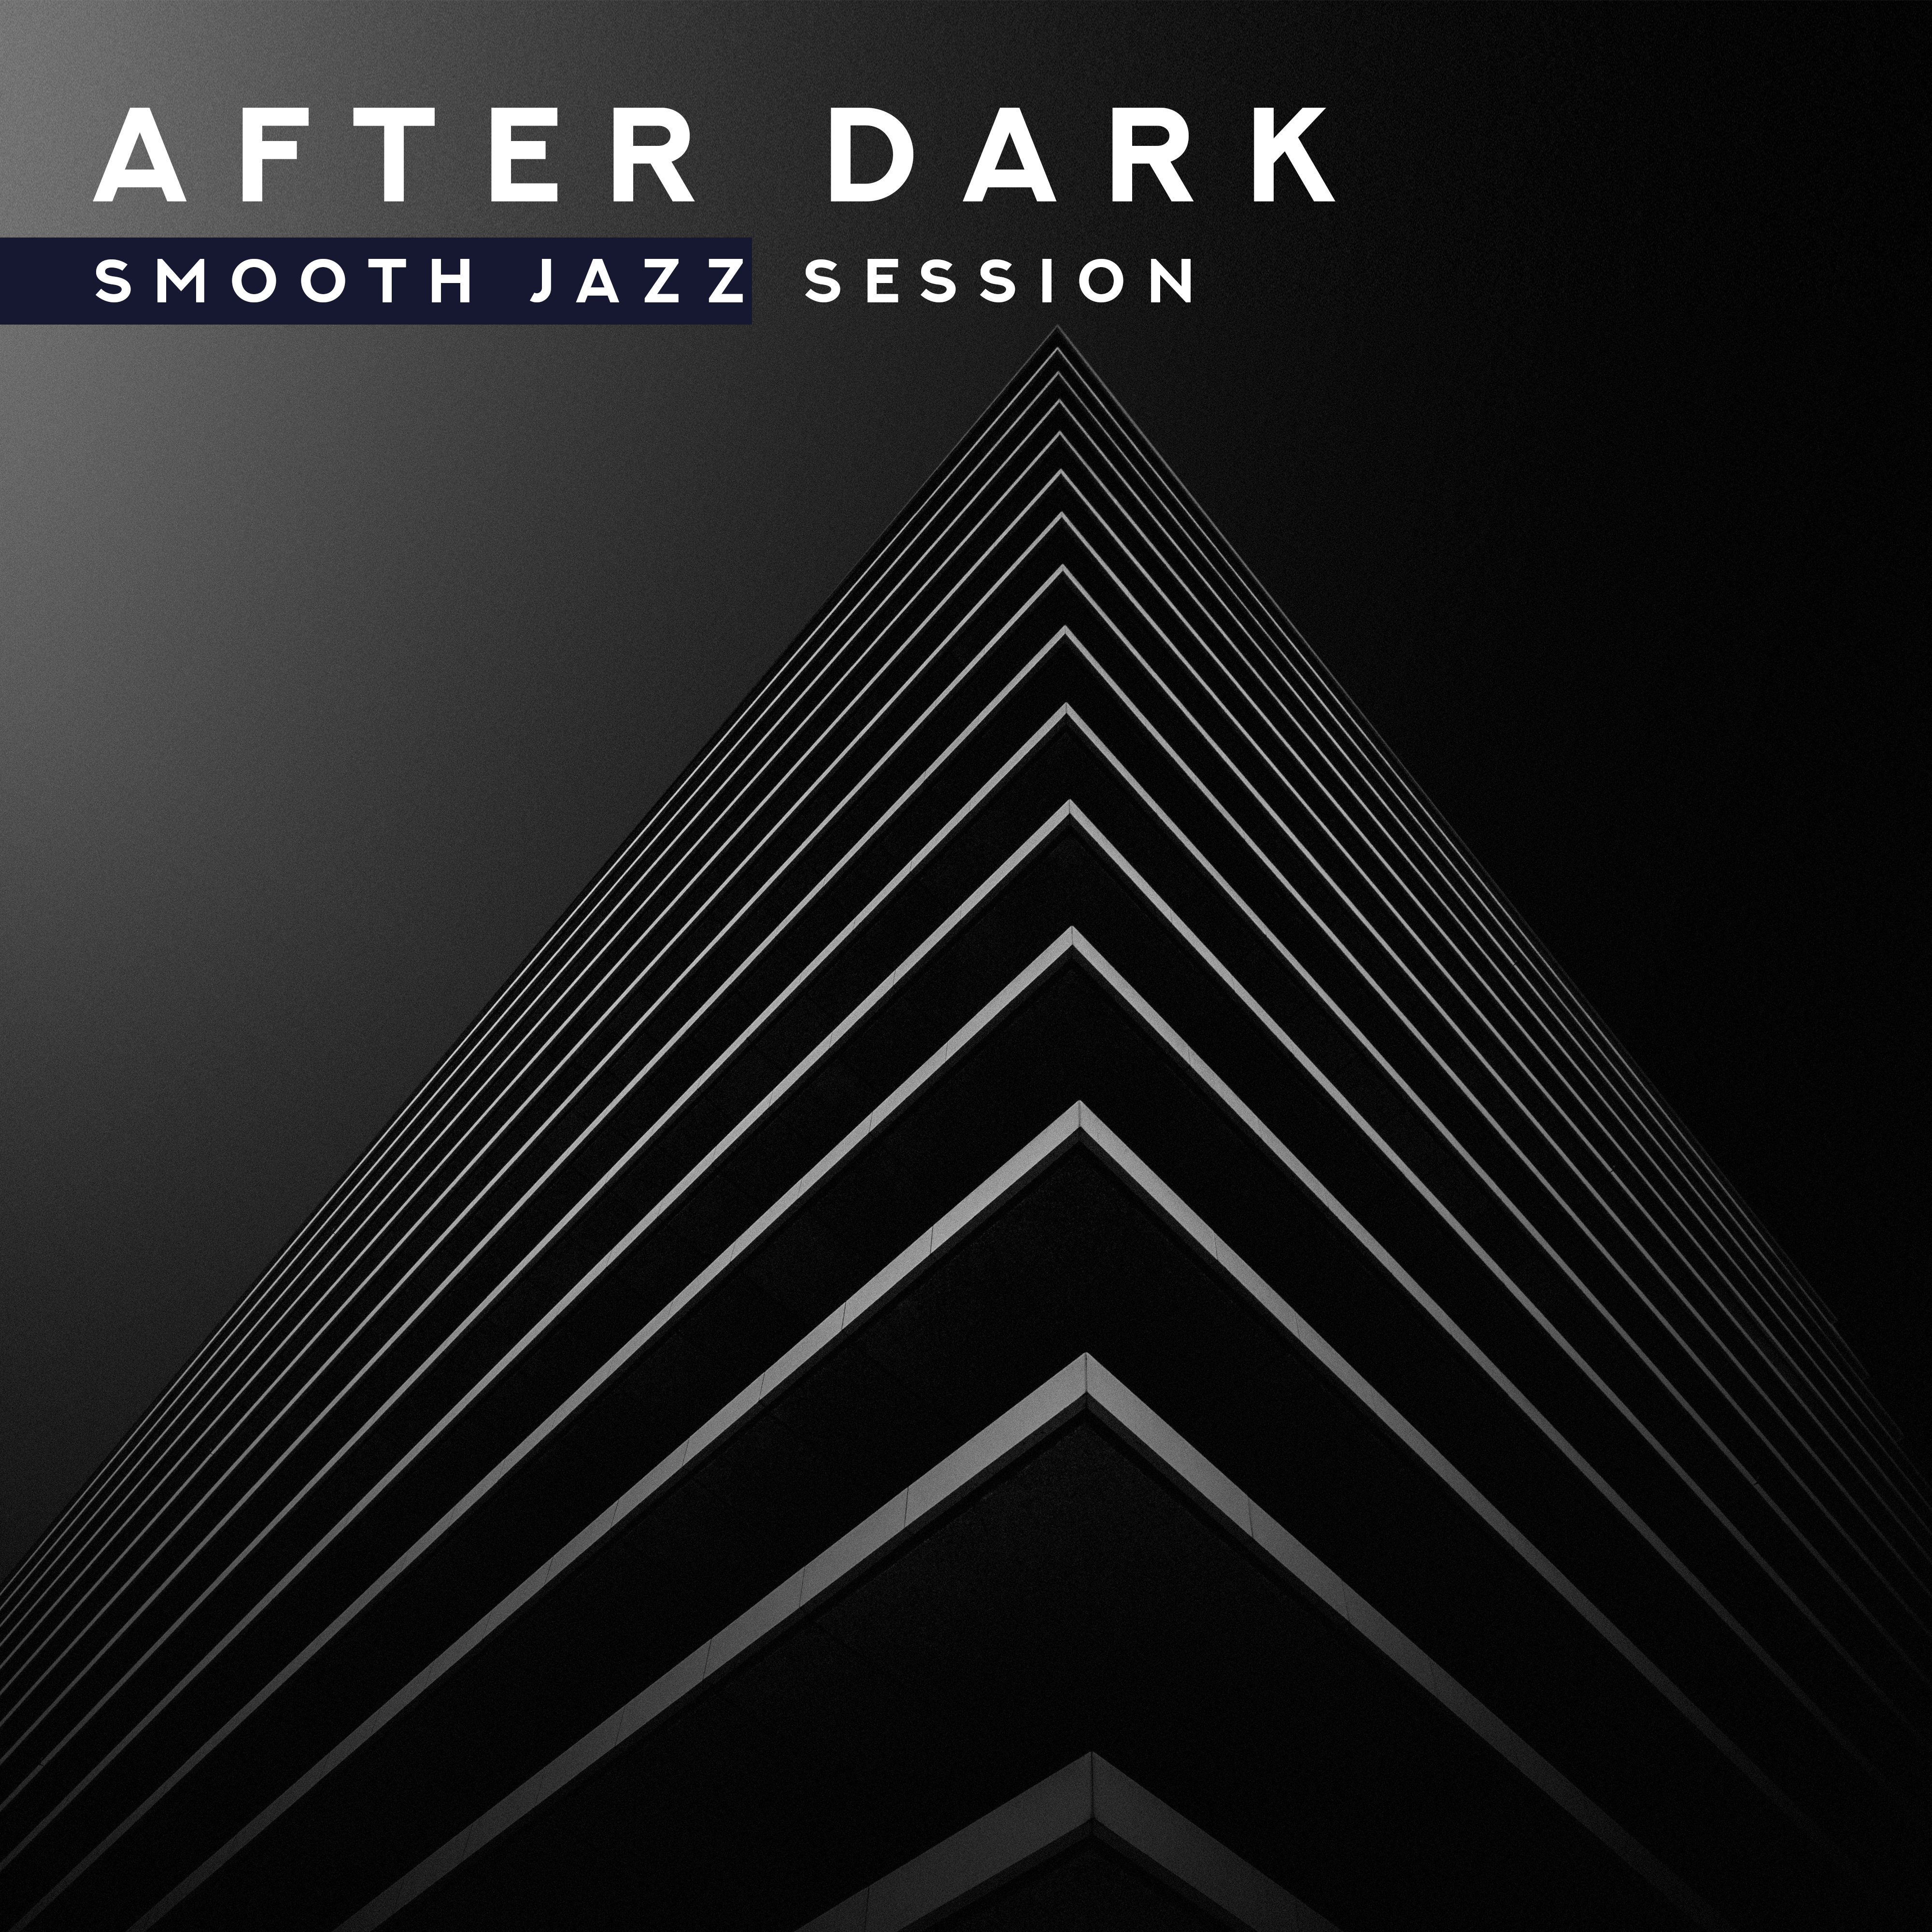 After Dark Smooth Jazz Session – Relax Night Jazz Music, Cocktail Party Songs